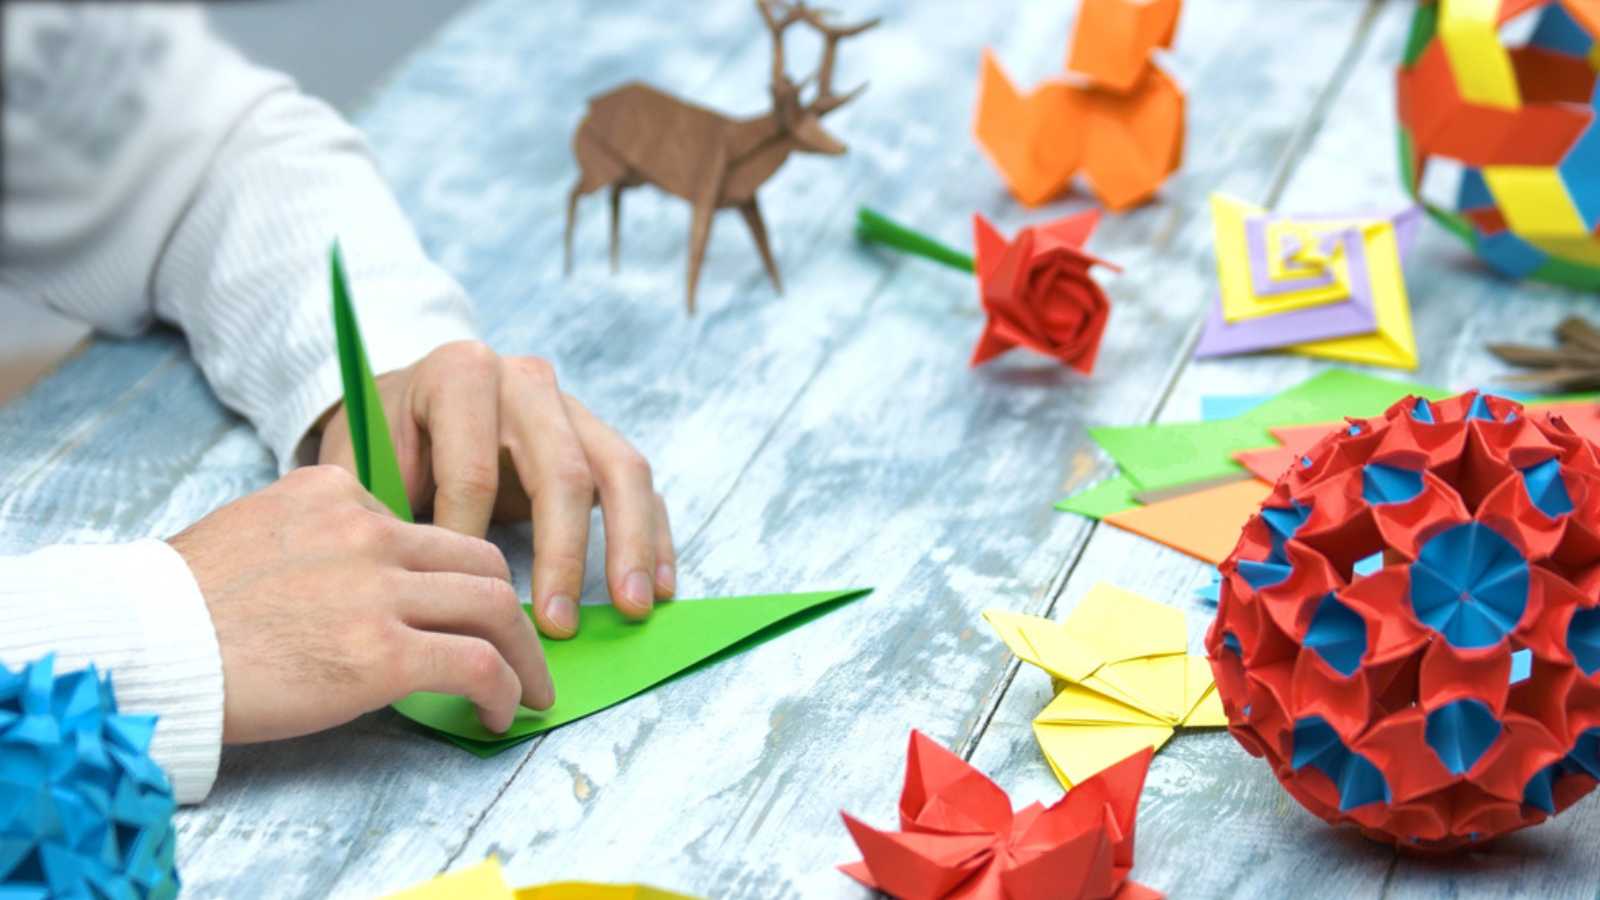 Man at origami folding lesson. Collection of beautiful origami figurines on wooden table. Traditional origami paper folding.